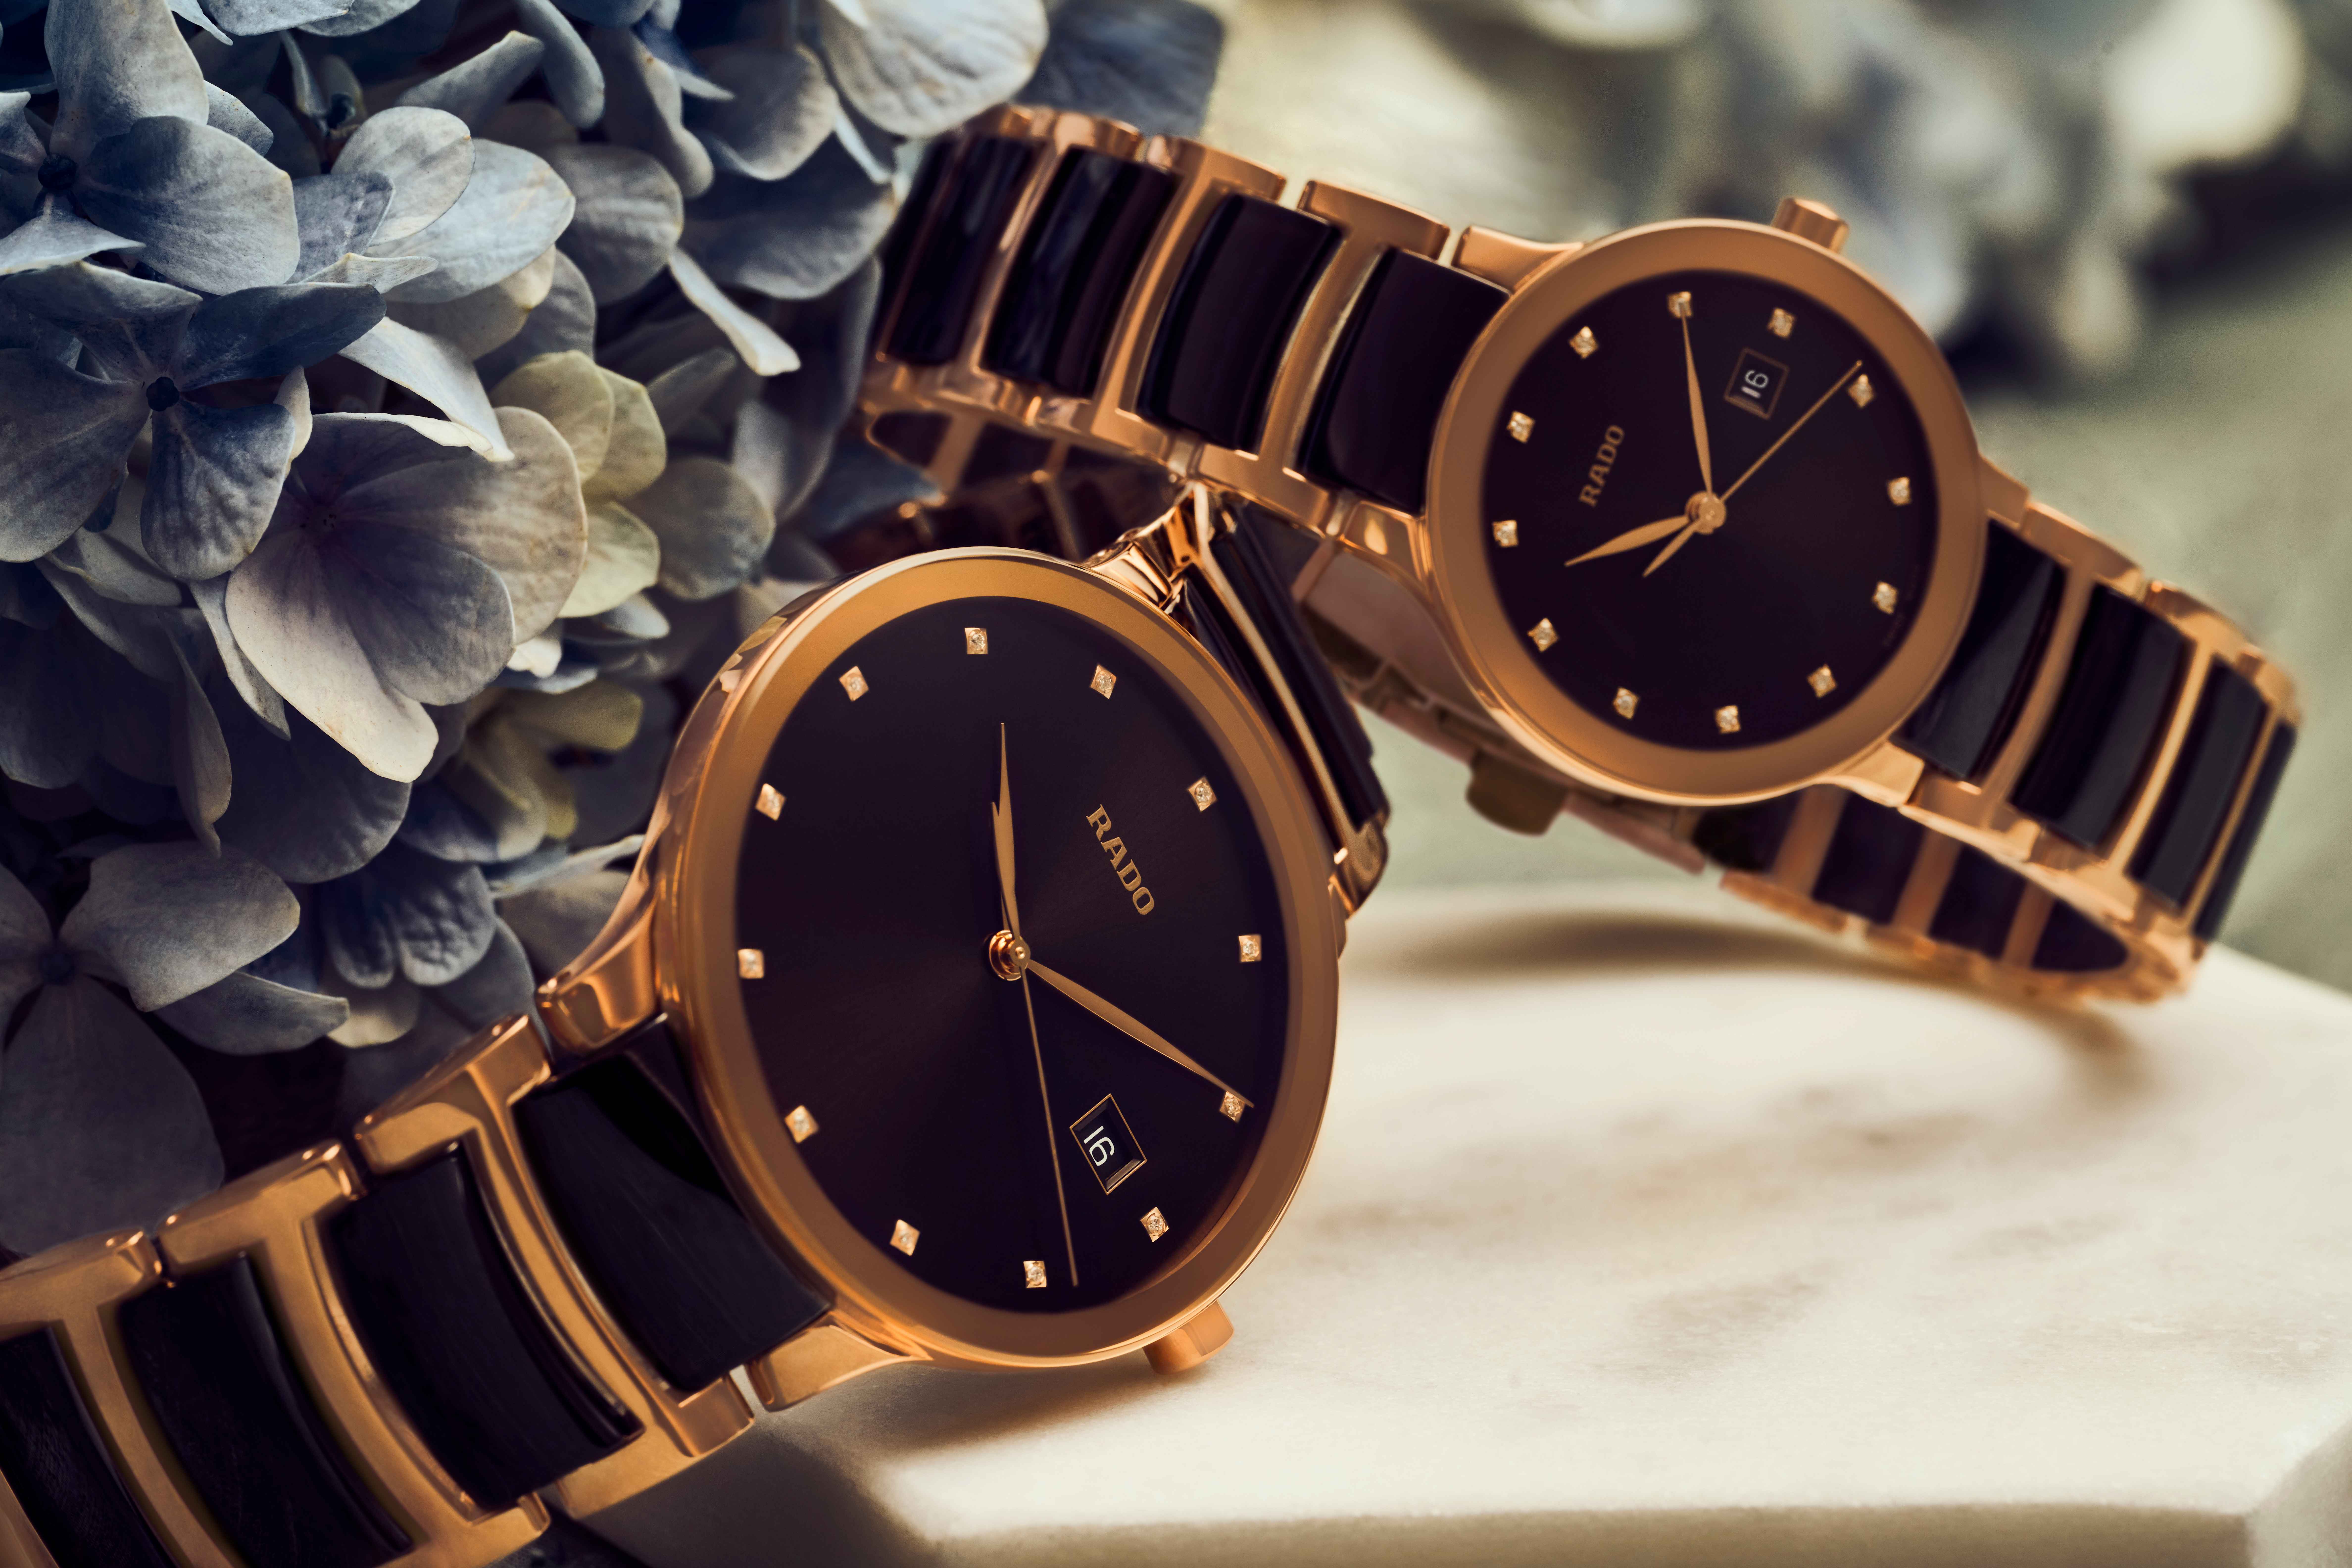 Rado Centrix Collection Makes For A Perfect And Timeless Wedding Gift!